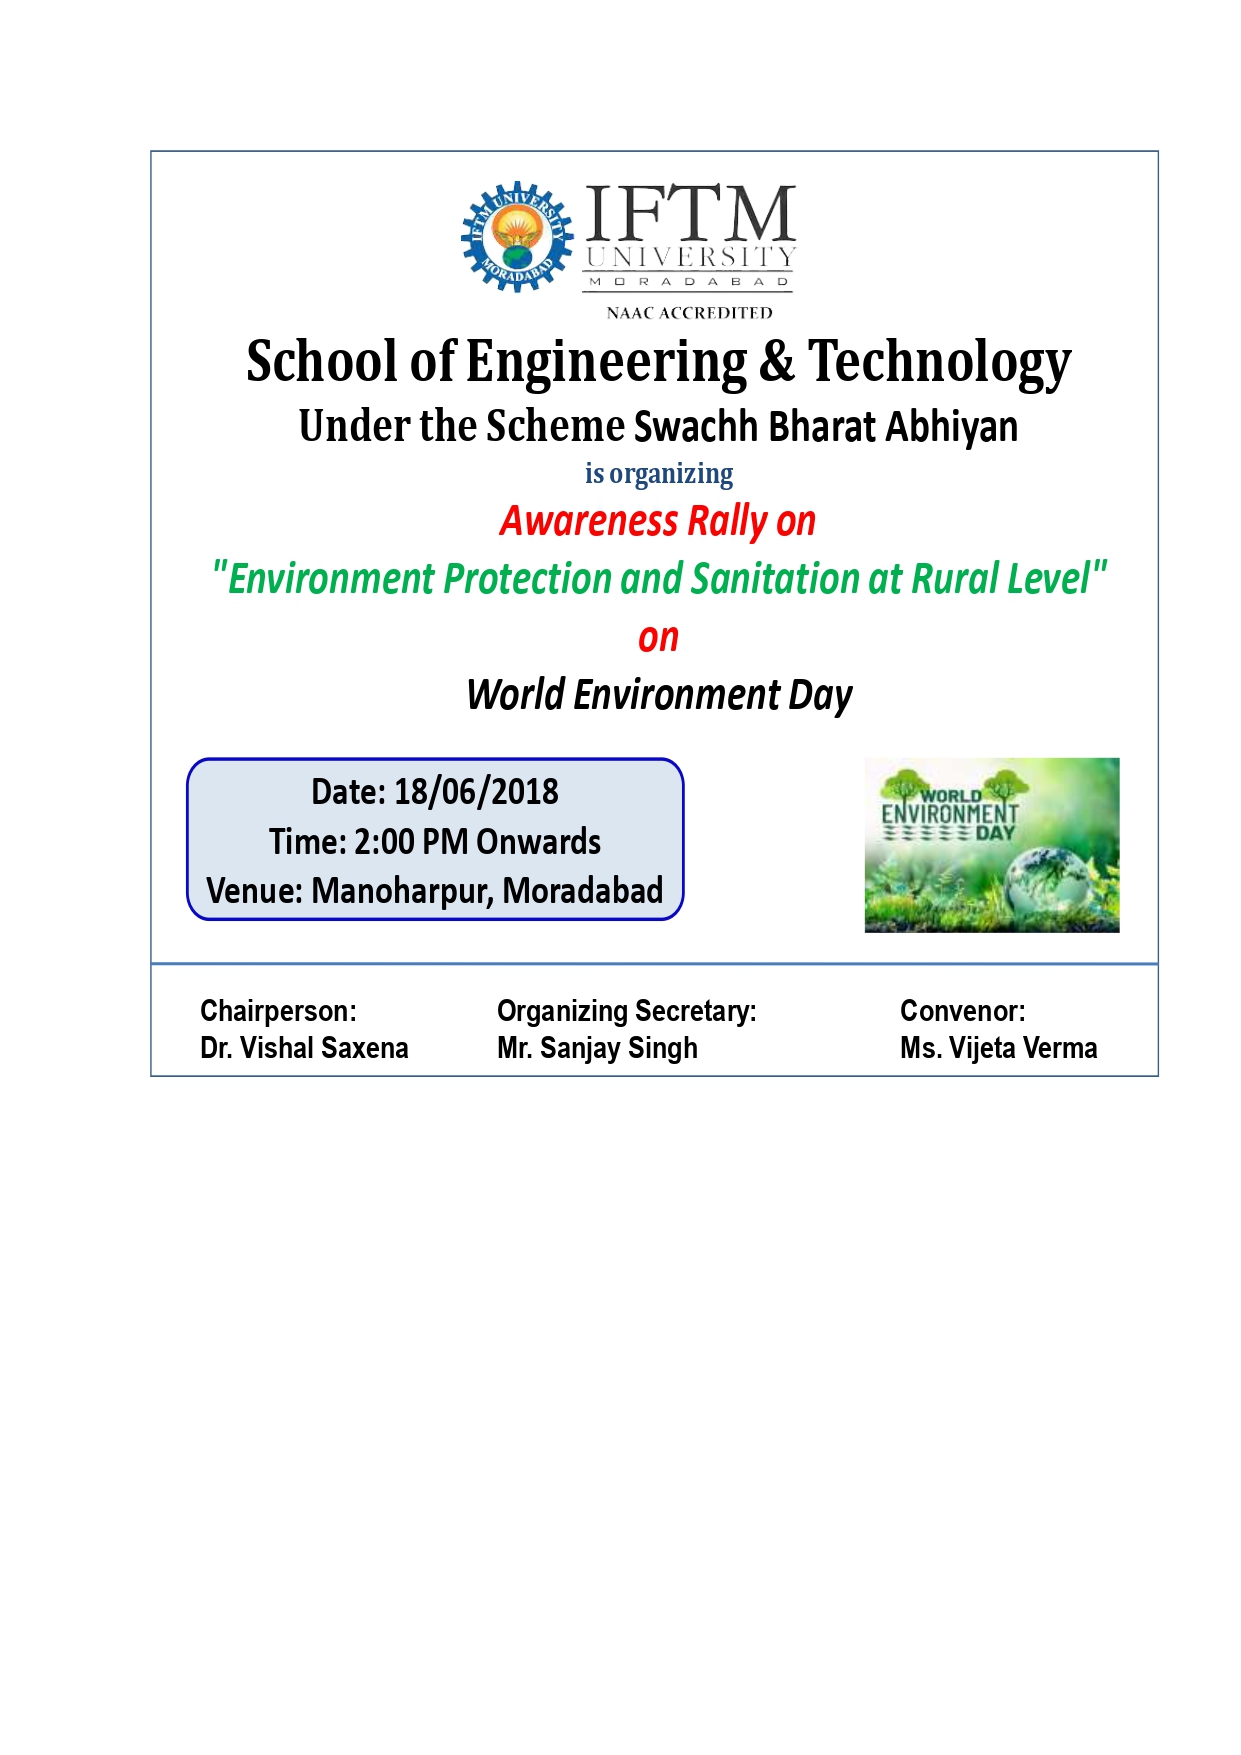 Awareness rally on Environment Protection and Sanitation at rural Level on World Environment Day